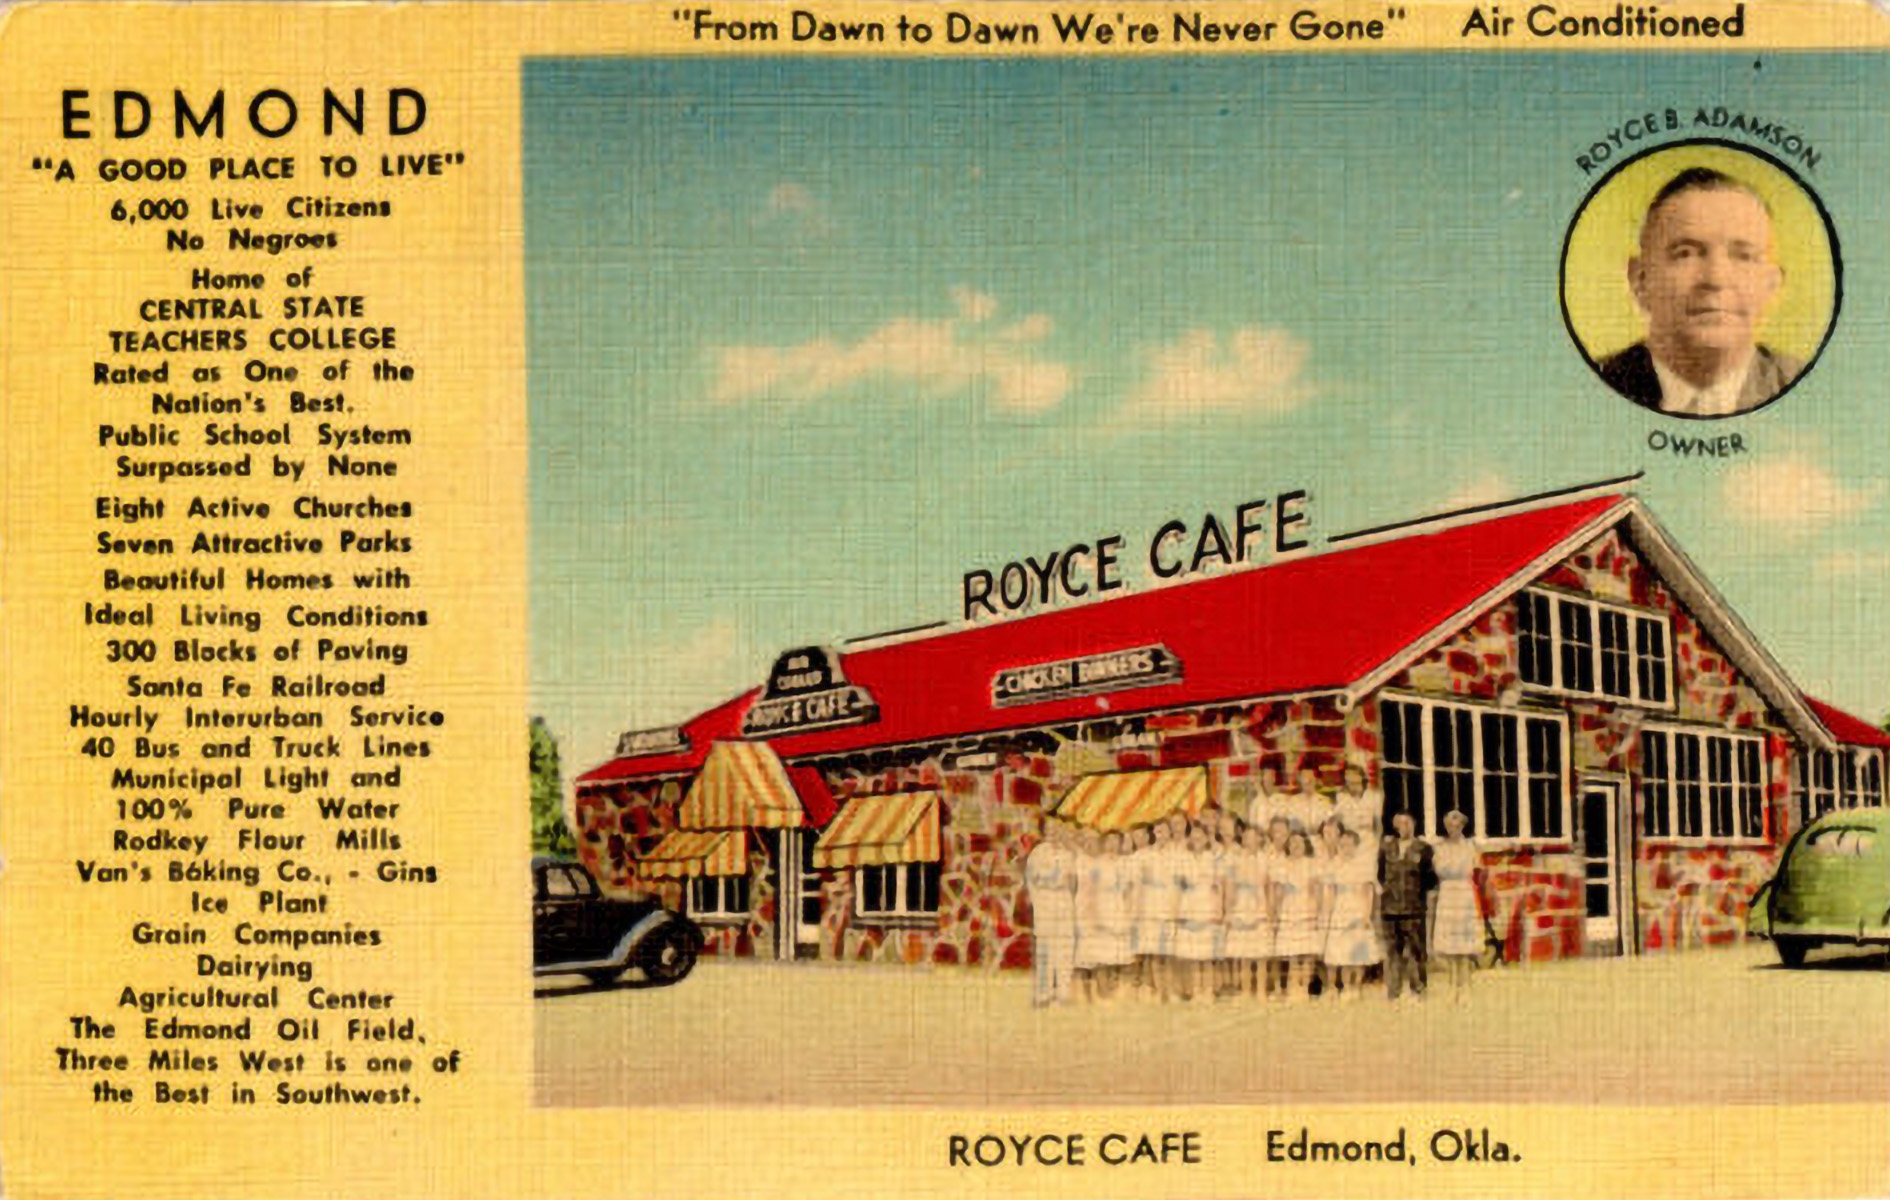 Edmond newspapers described the Oklahoma town as 100% White in the 1920s. Local businesses like the Royce Cafe, one of Edmond's most popular restaurants from the 1930s until 1970, also included this message in their marketing.